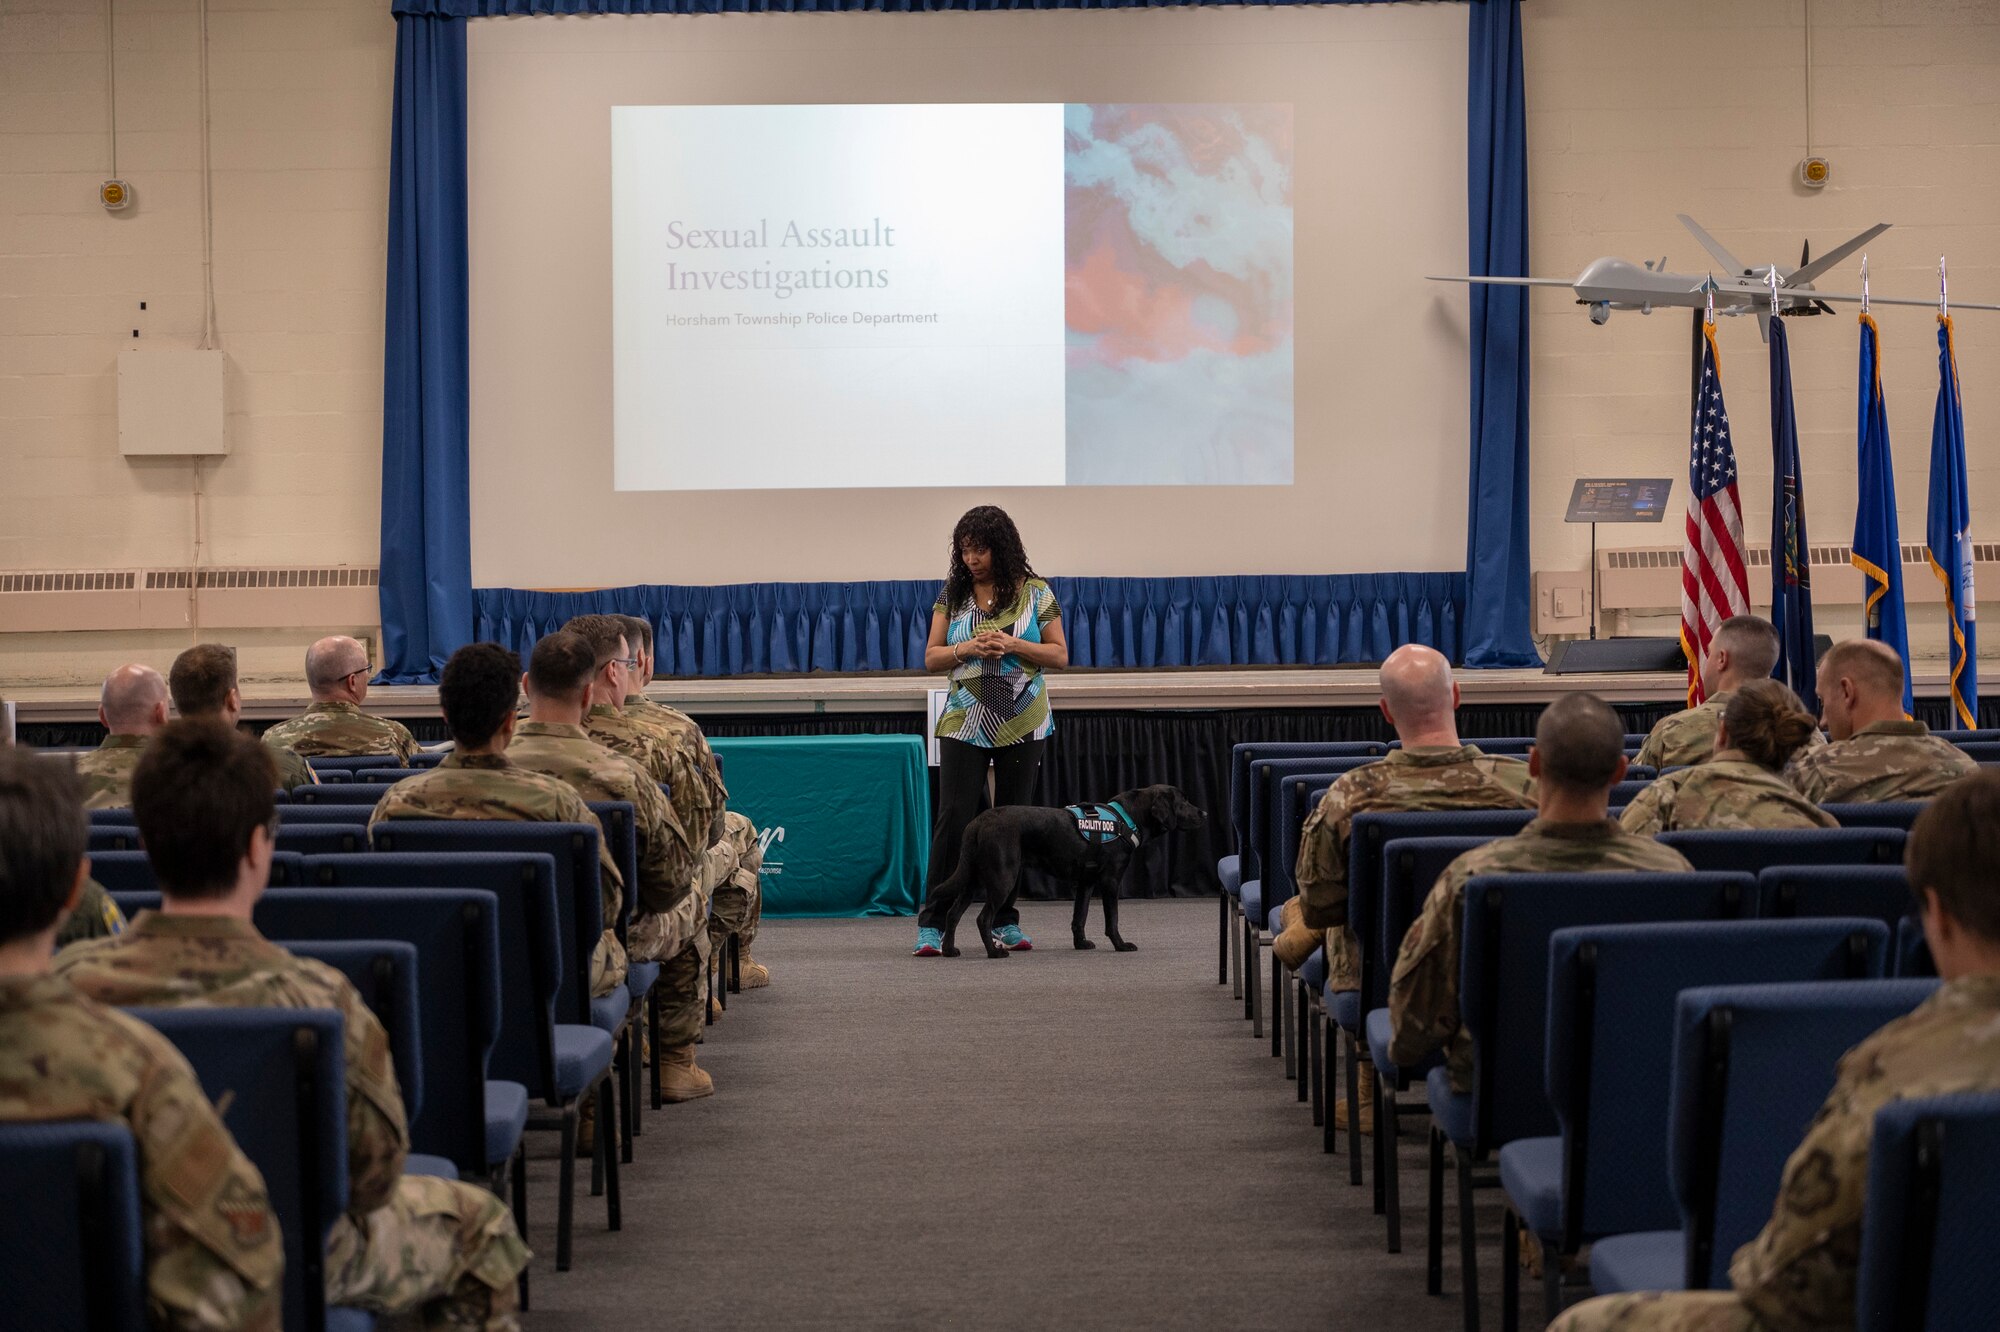 A woman briefs a military audience.